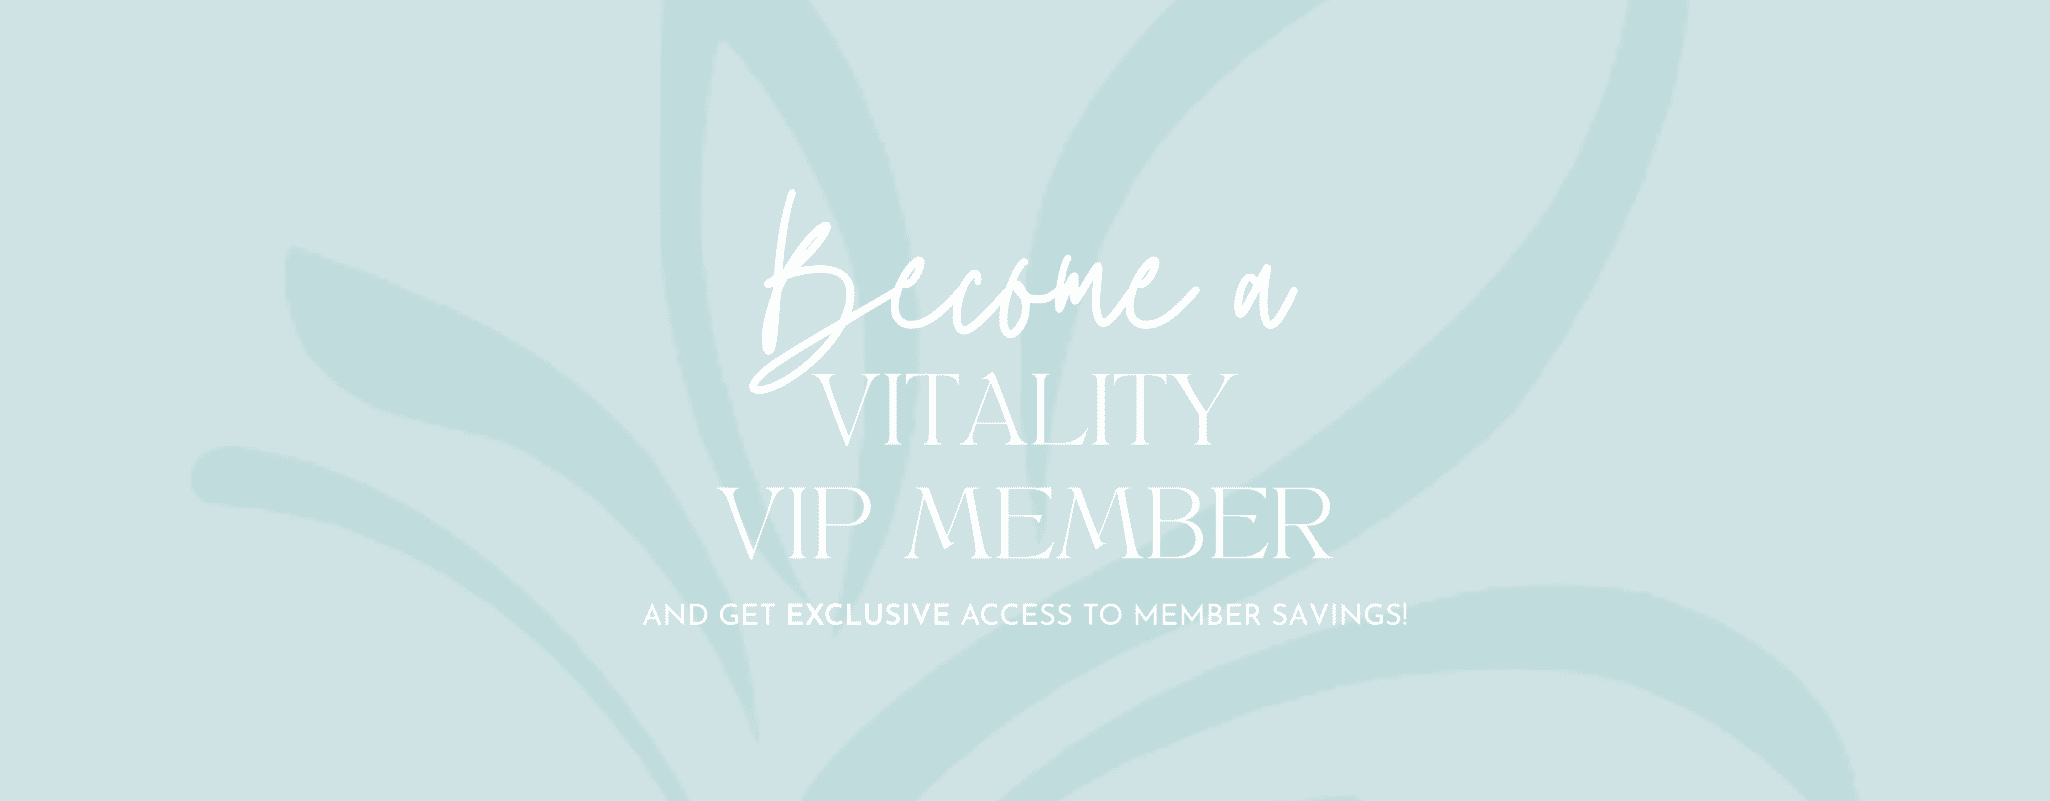 become a vitality vip member 1020 × 340 px Banner Landscape 2